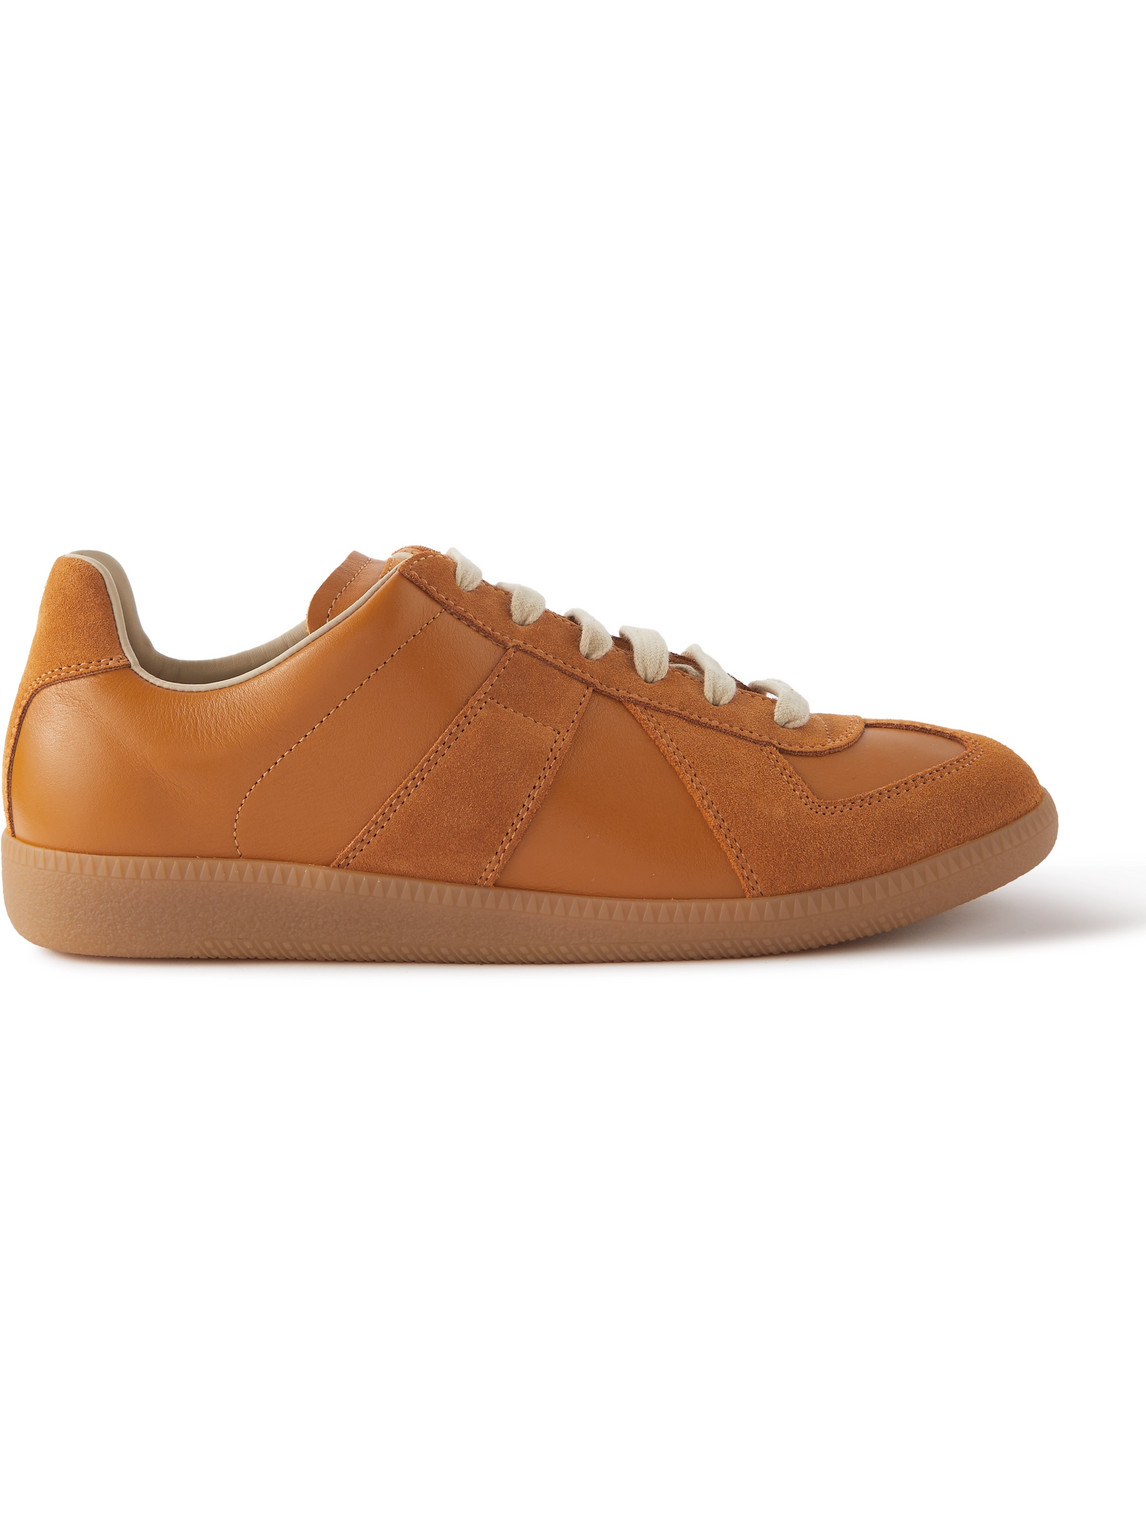 Maison Margiela Replica Leather And Suede Sneakers In Orange